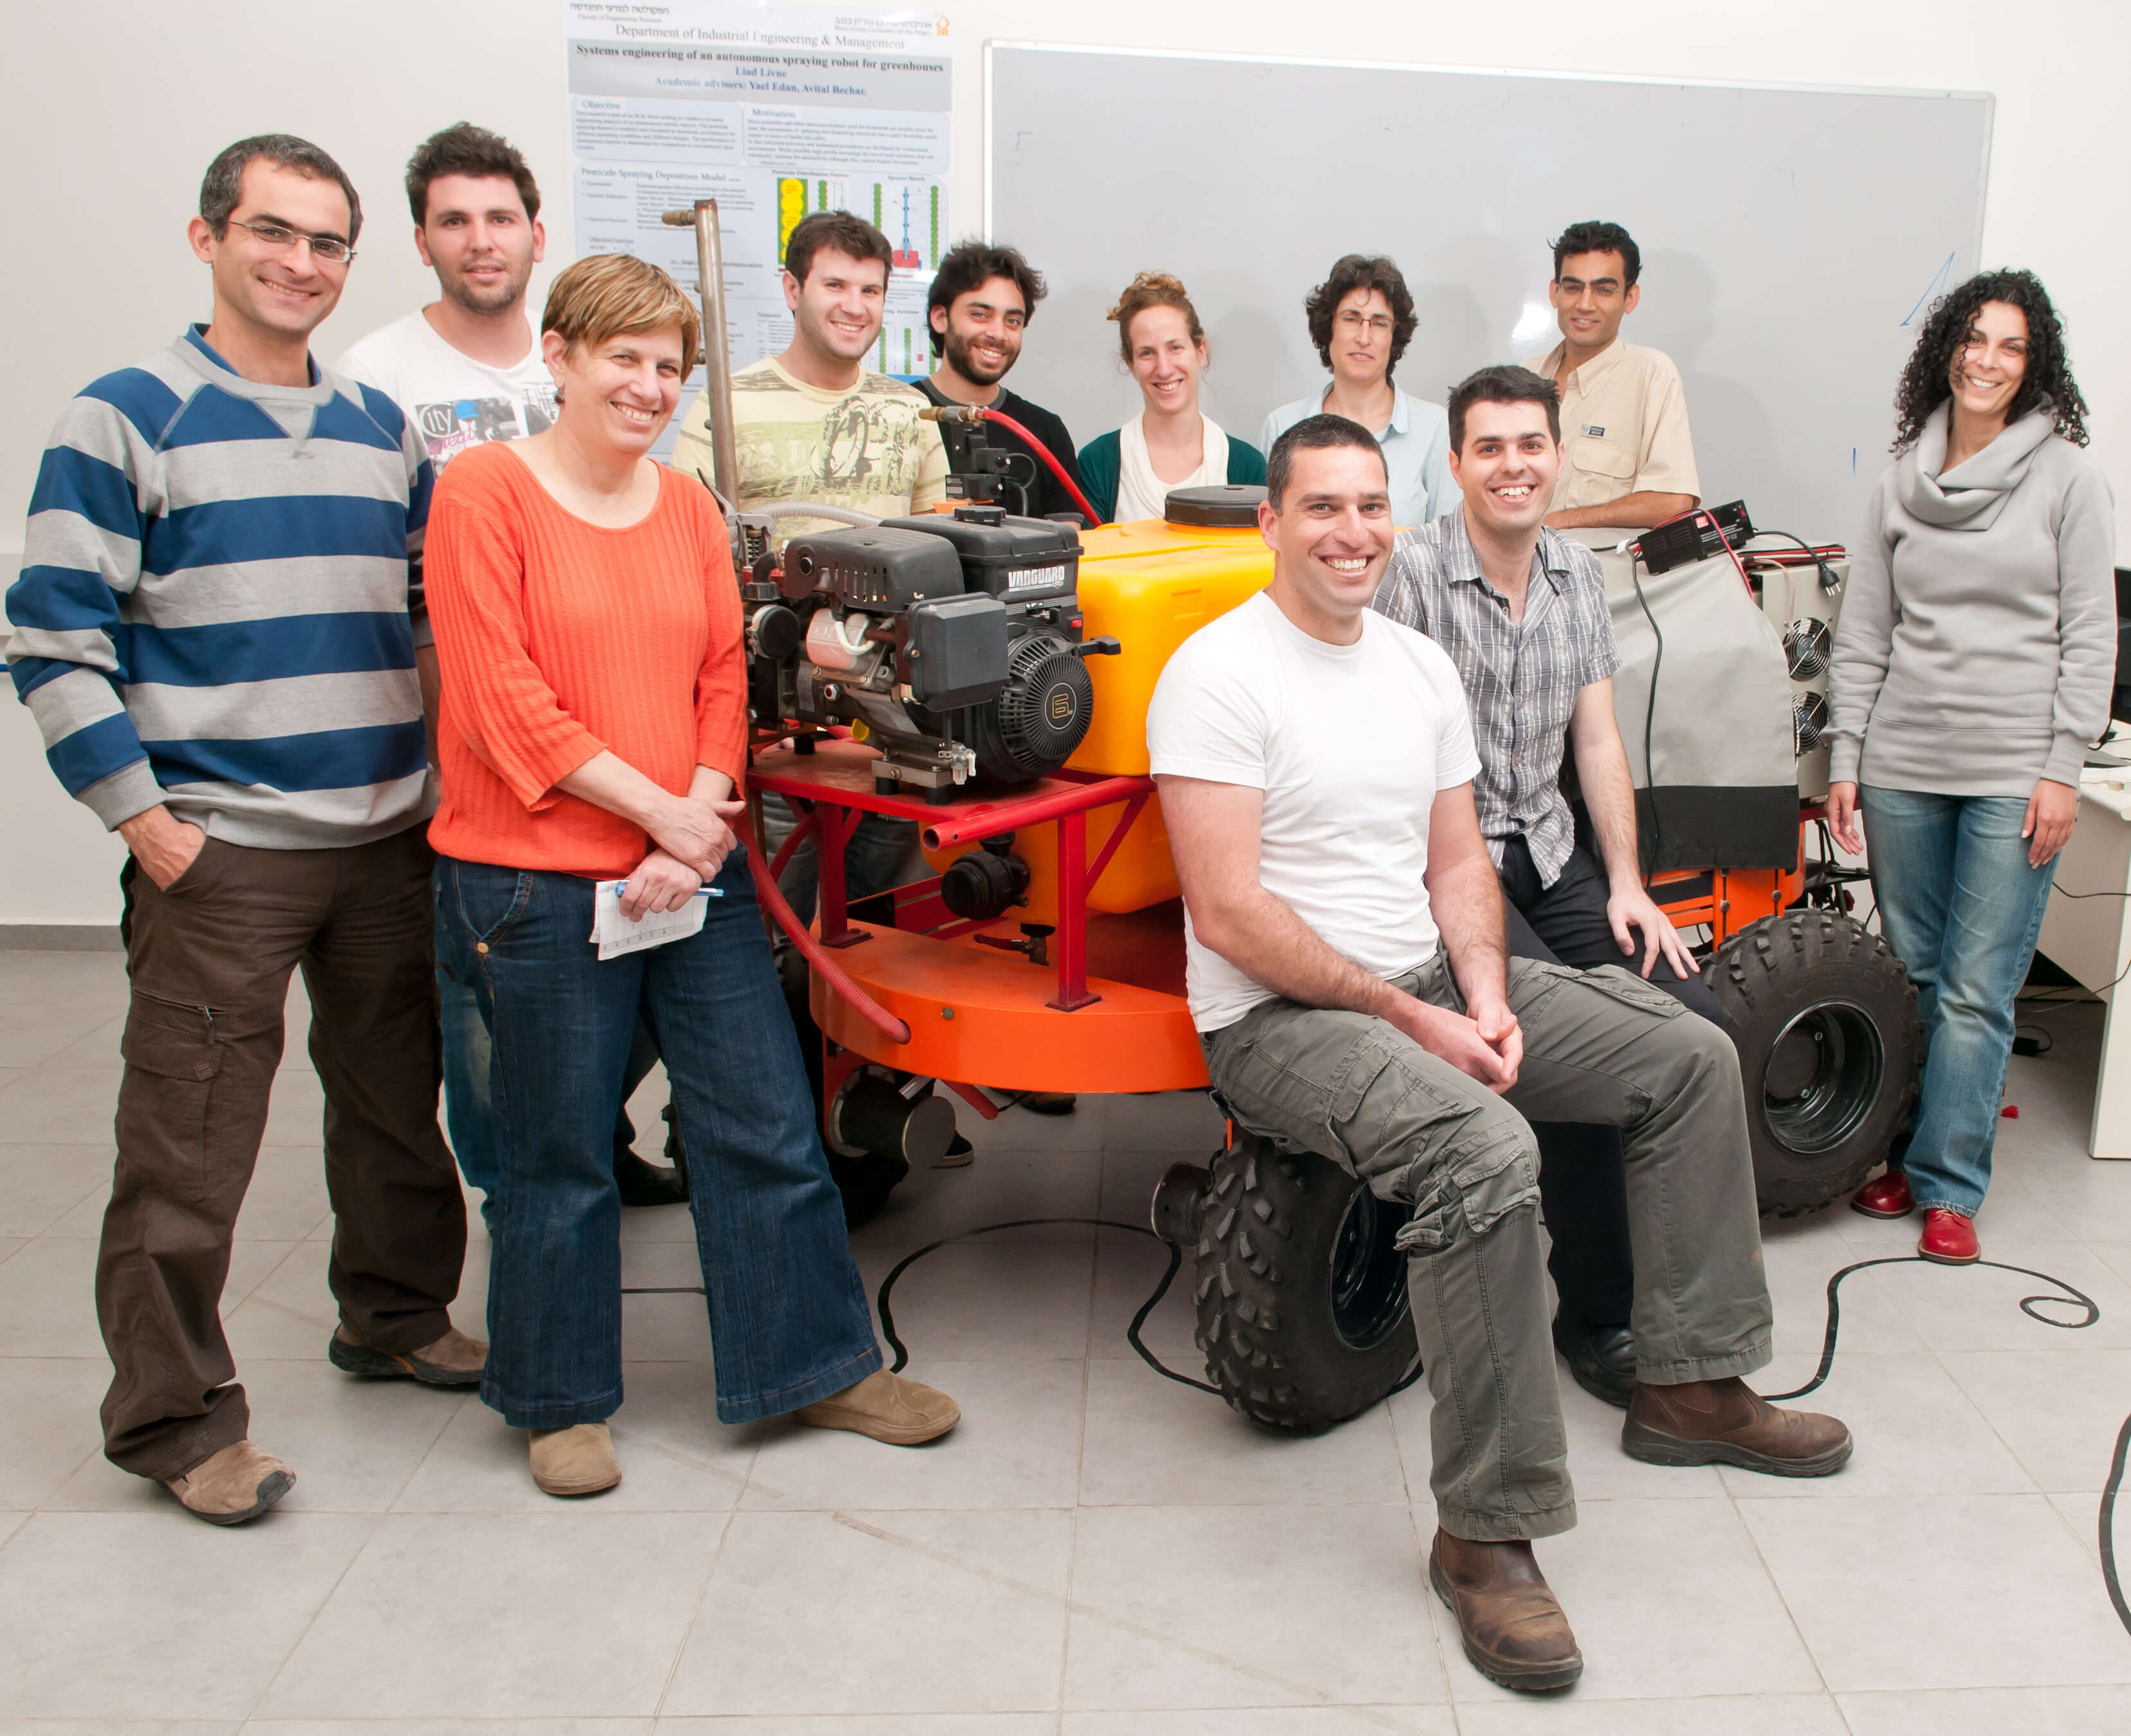 Prof. Yael Iden with a group of young researchers from Ben-Gurion University of the Negev who are engaged in the development of robots for agricultural needs. Photo: Danny Machlis, Ben-Gurion University of the Negev.